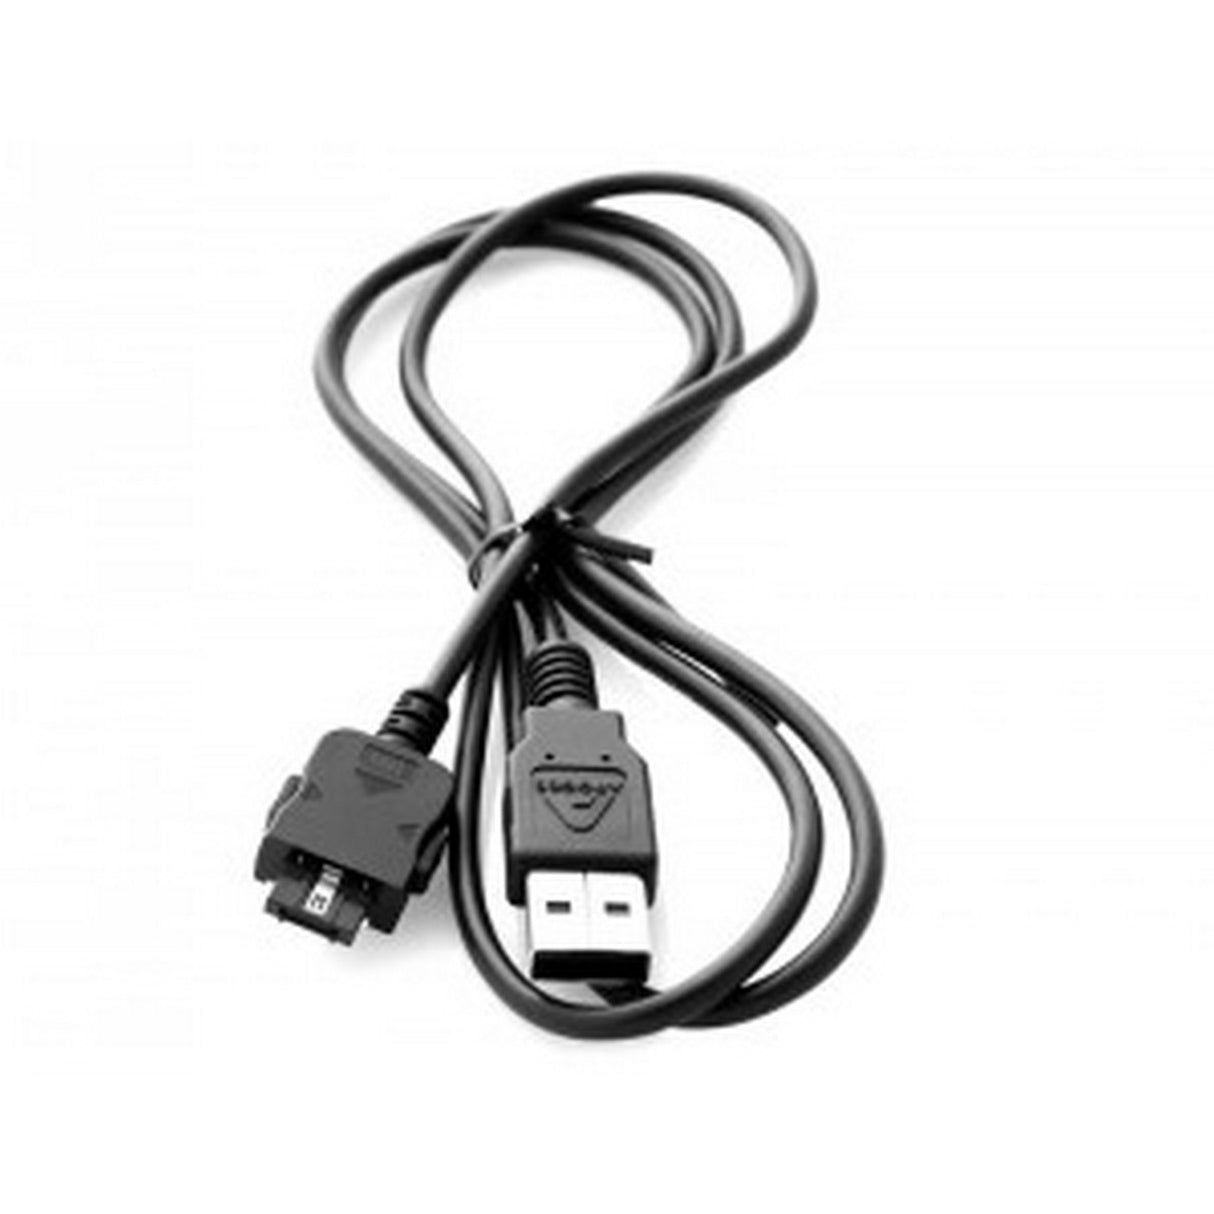 Apogee 0485-0016-0000 | 1 Meter Mac USB Cable for JAM and MIC